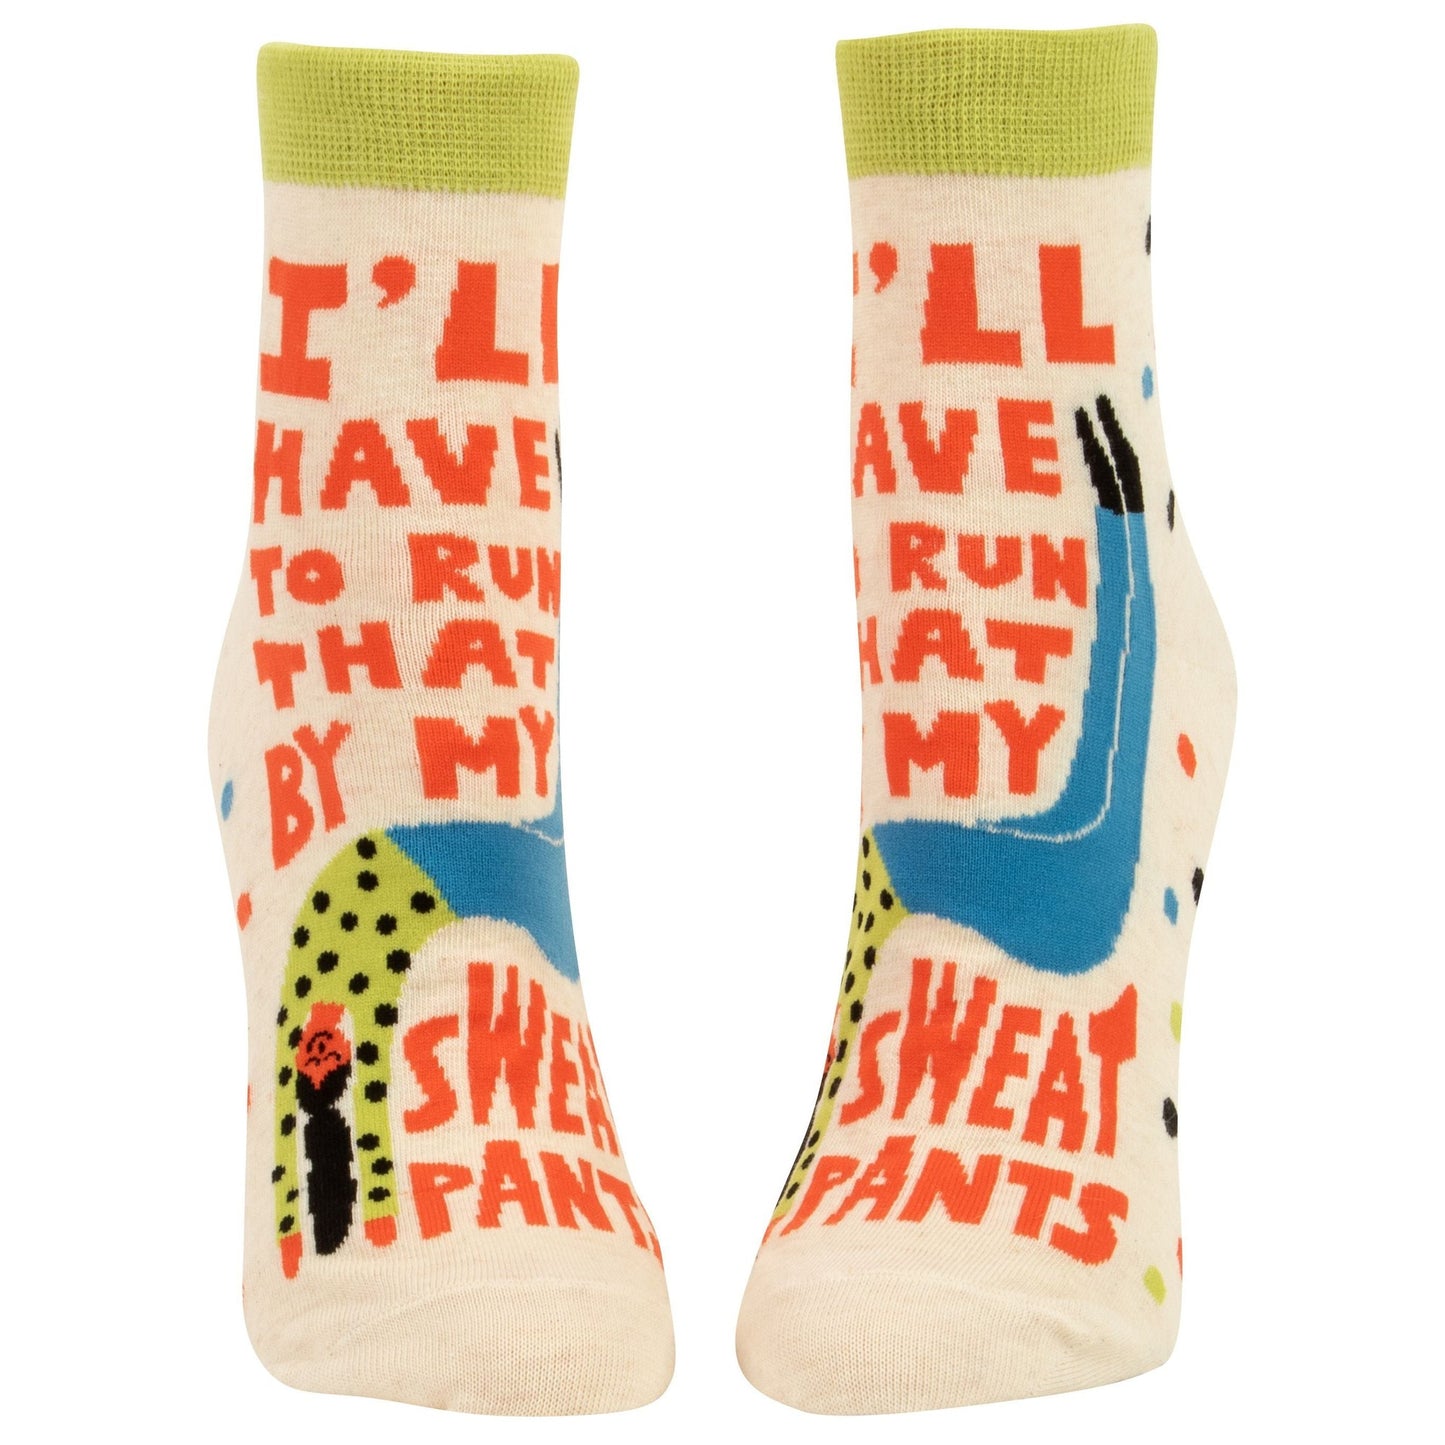 I'll Have To Run That By My Sweatpants Women's Ankle Socks